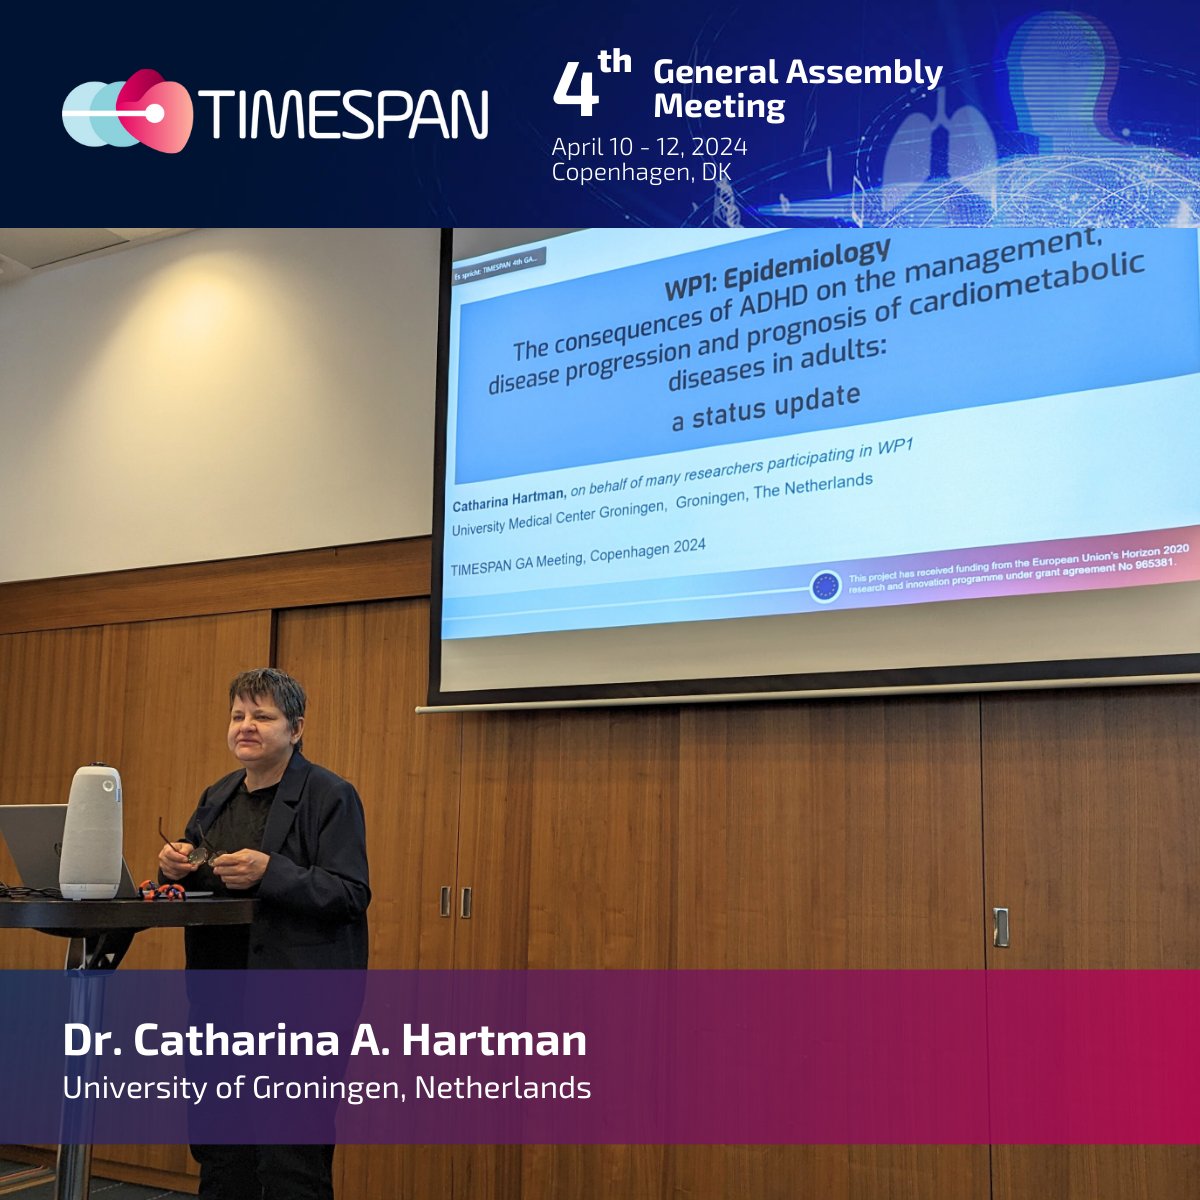 And now, let’s dive straight into the topic: Catharina Hartman presents updates on the work package on #epidemiology: Which impact does #ADHD have on patients with cardiometabolic diseases, like #obesity & #Type2diabetes? How can we optimize care for these patients? 💡